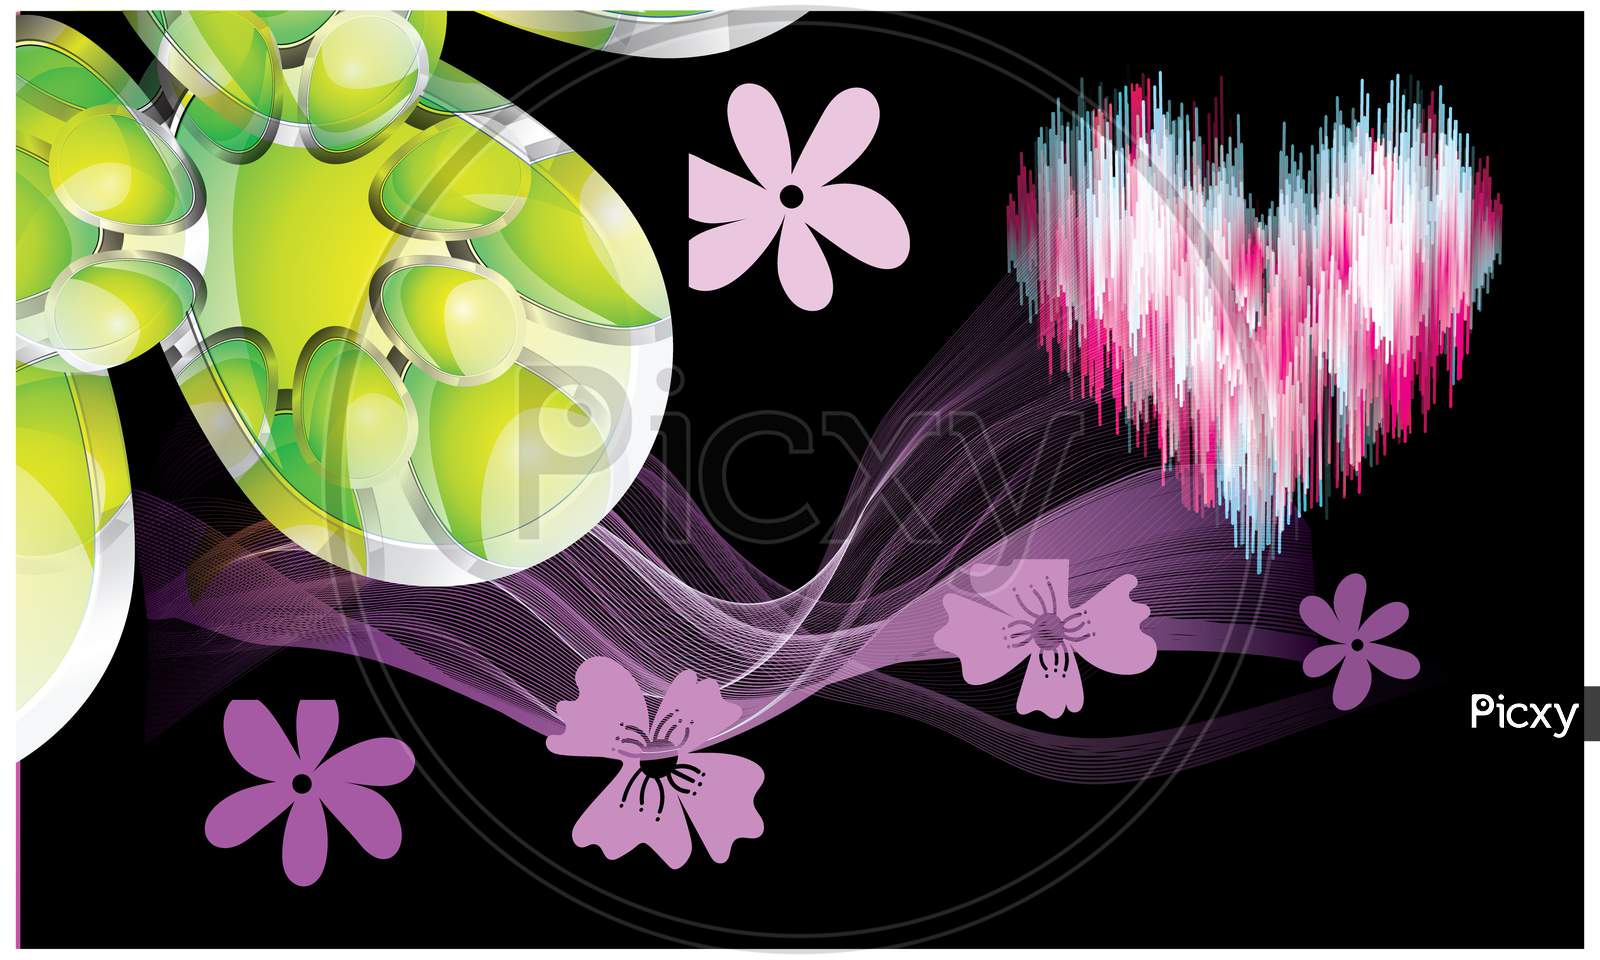 Art Design With Flower And Hearts On Abstract Background